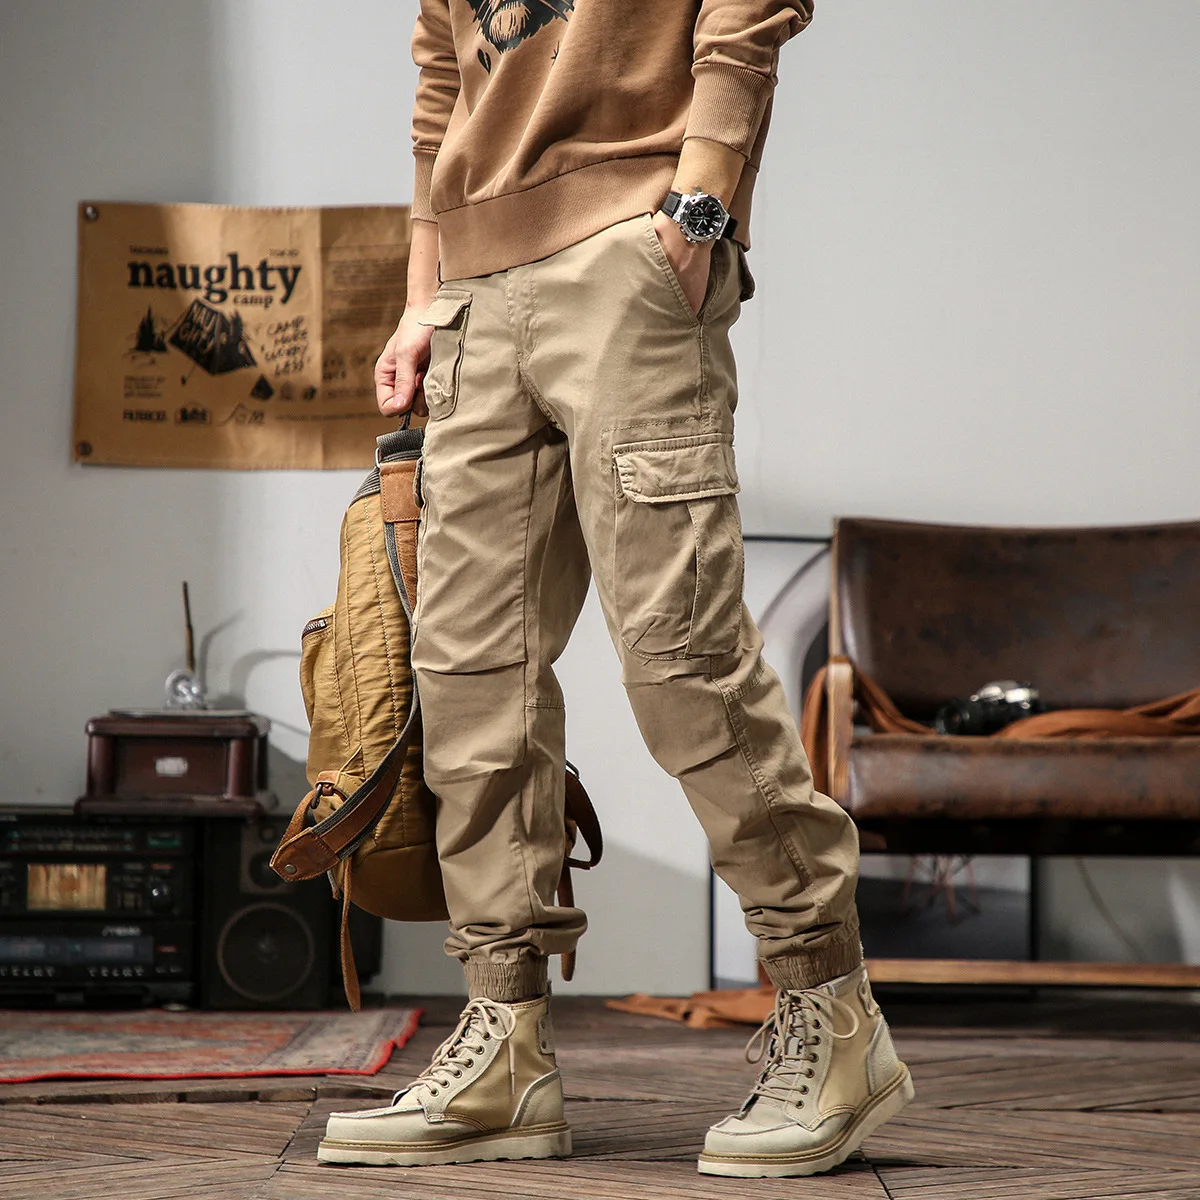 Elmsk Men's Spring and Autumn New Vintage Khaki Workwear Pants with Loose Feet and Large Pockets Trendy Heavyweight Casual Sport elmsk trendy loose fitting workwear pants with three dimensional multiple pockets casual and breathable cropped pants for stude